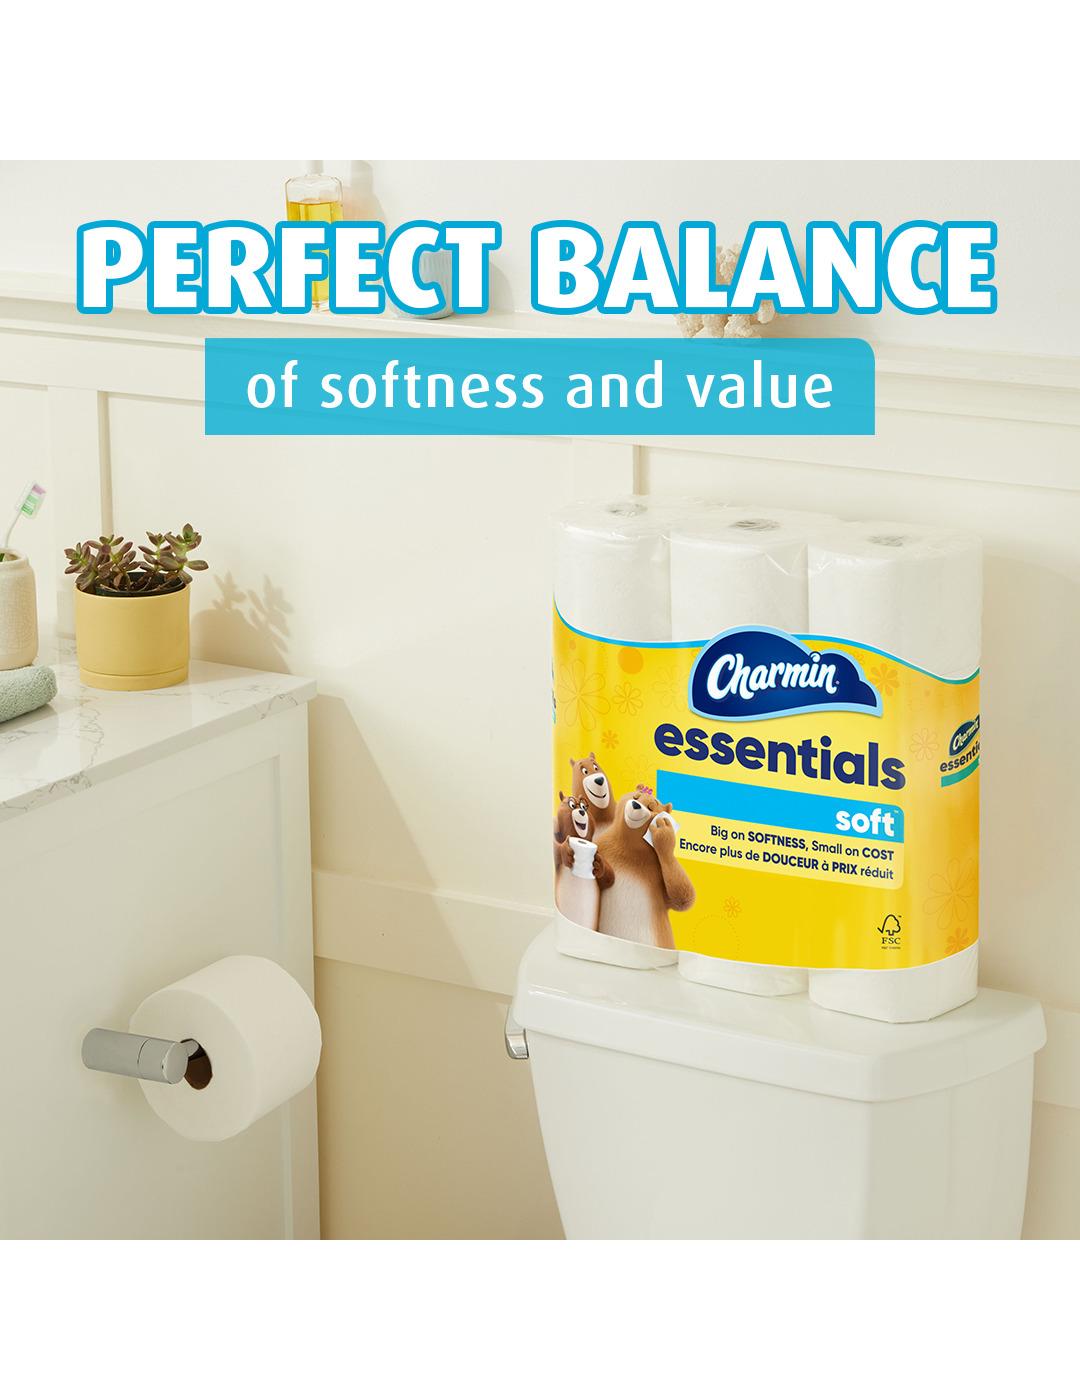 Charmin Essentials Soft Toilet Paper; image 3 of 13